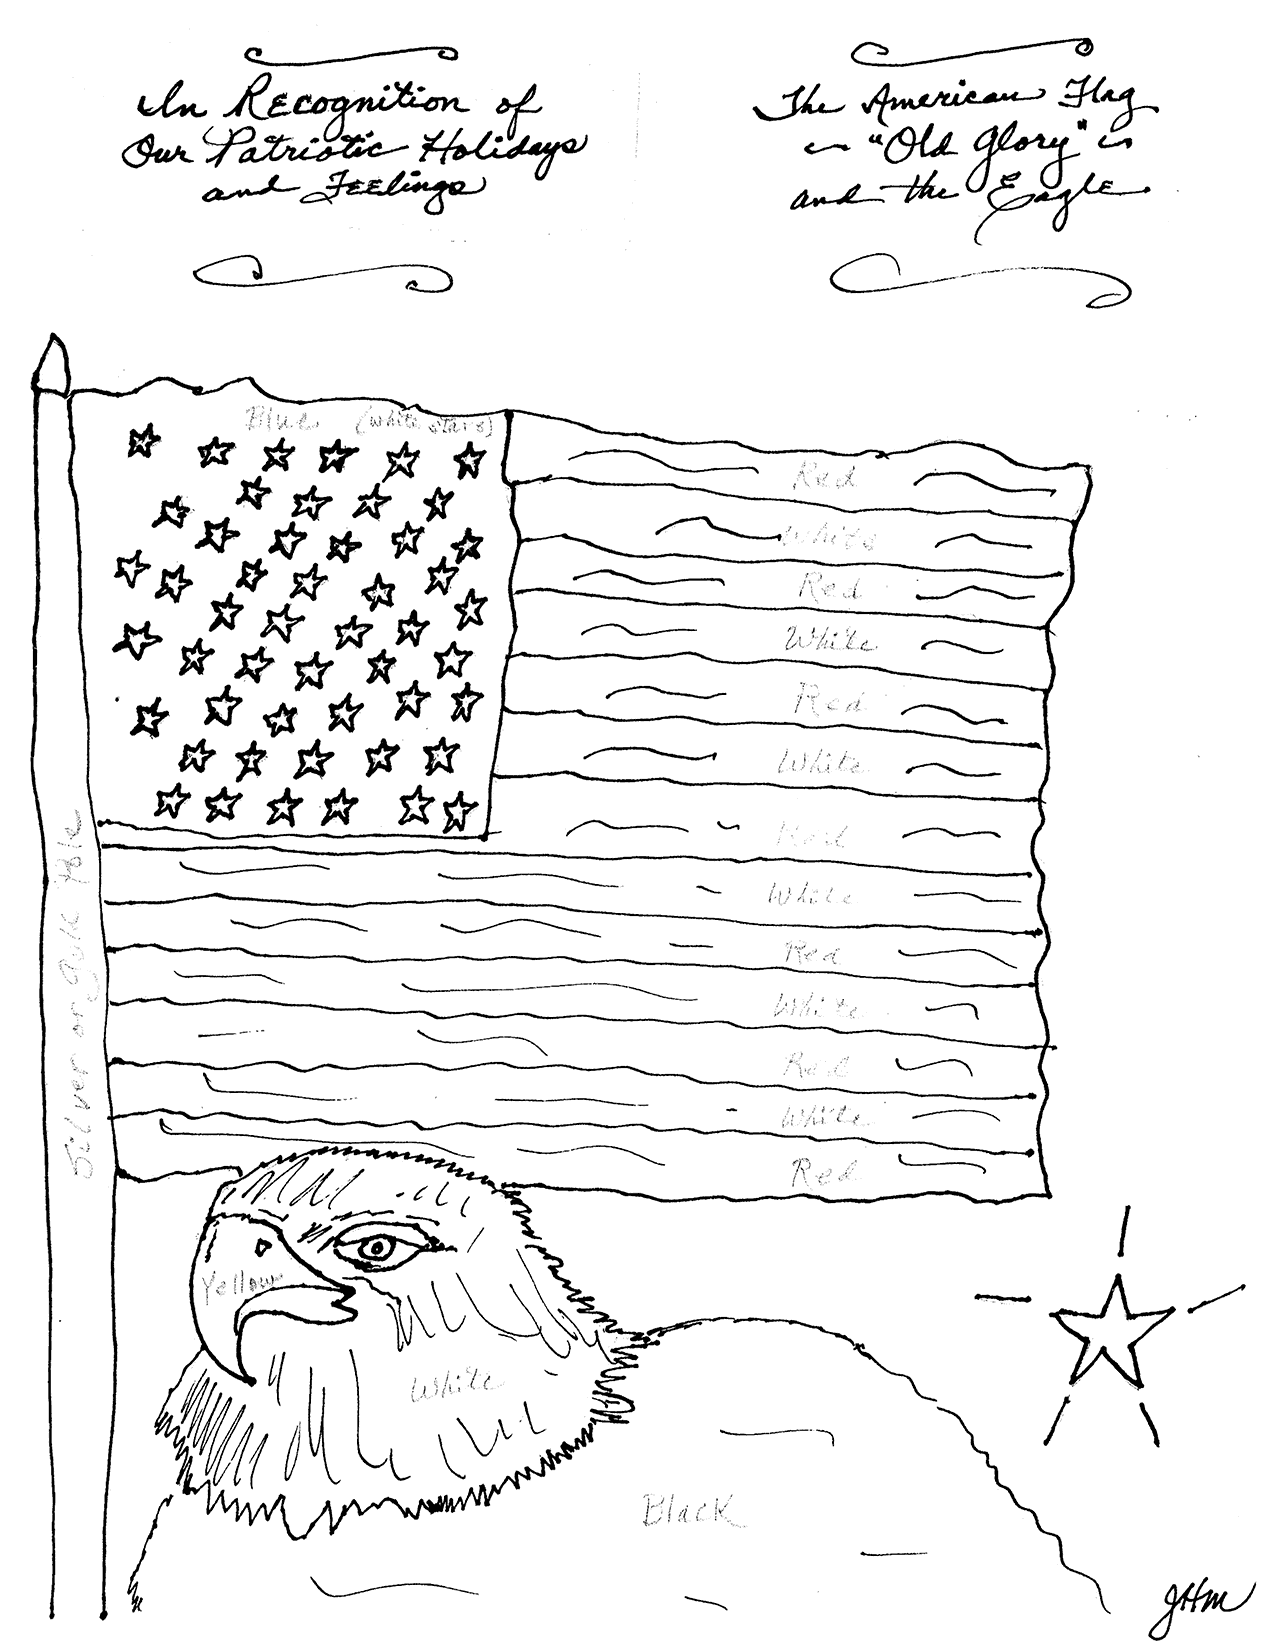 The American Flag - Old Glory - And The Eagle